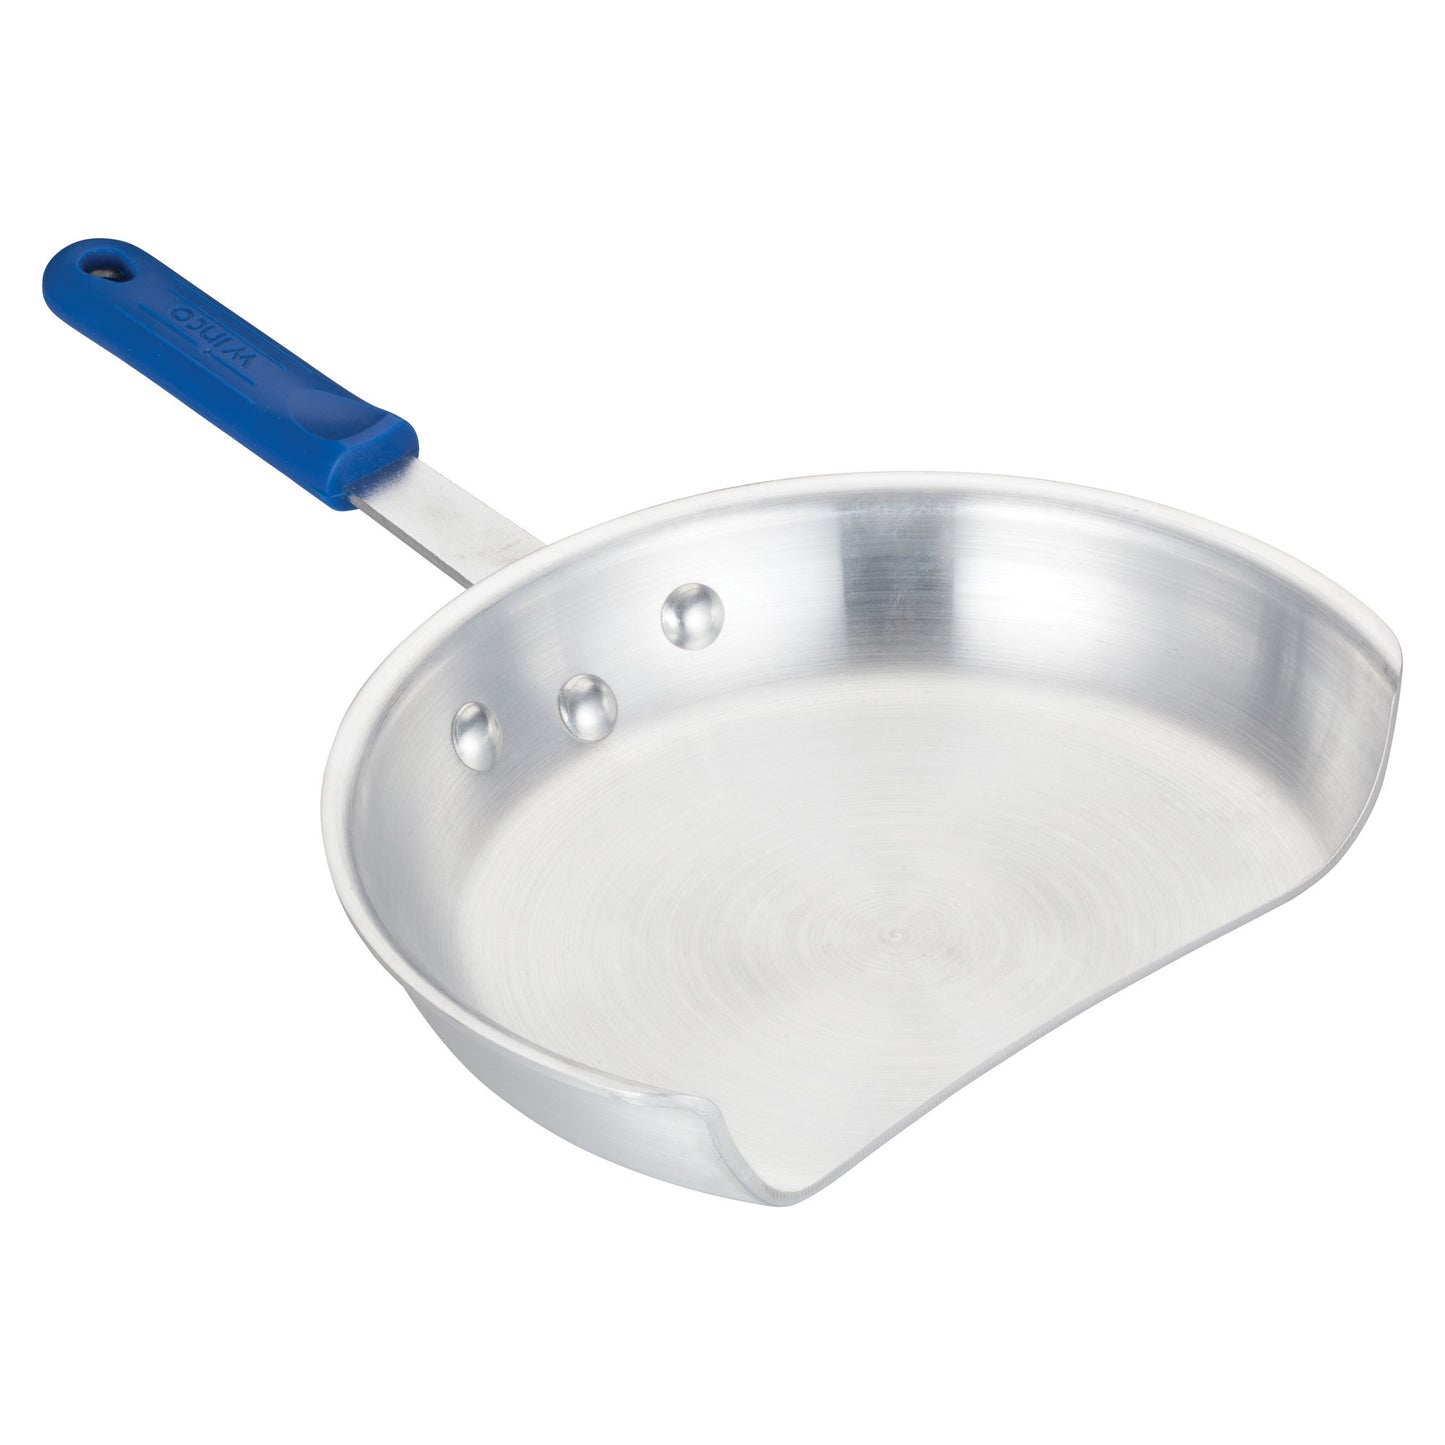 AGP-10 - 10" Aluminum Gyro Pan with Silicone Sleeve